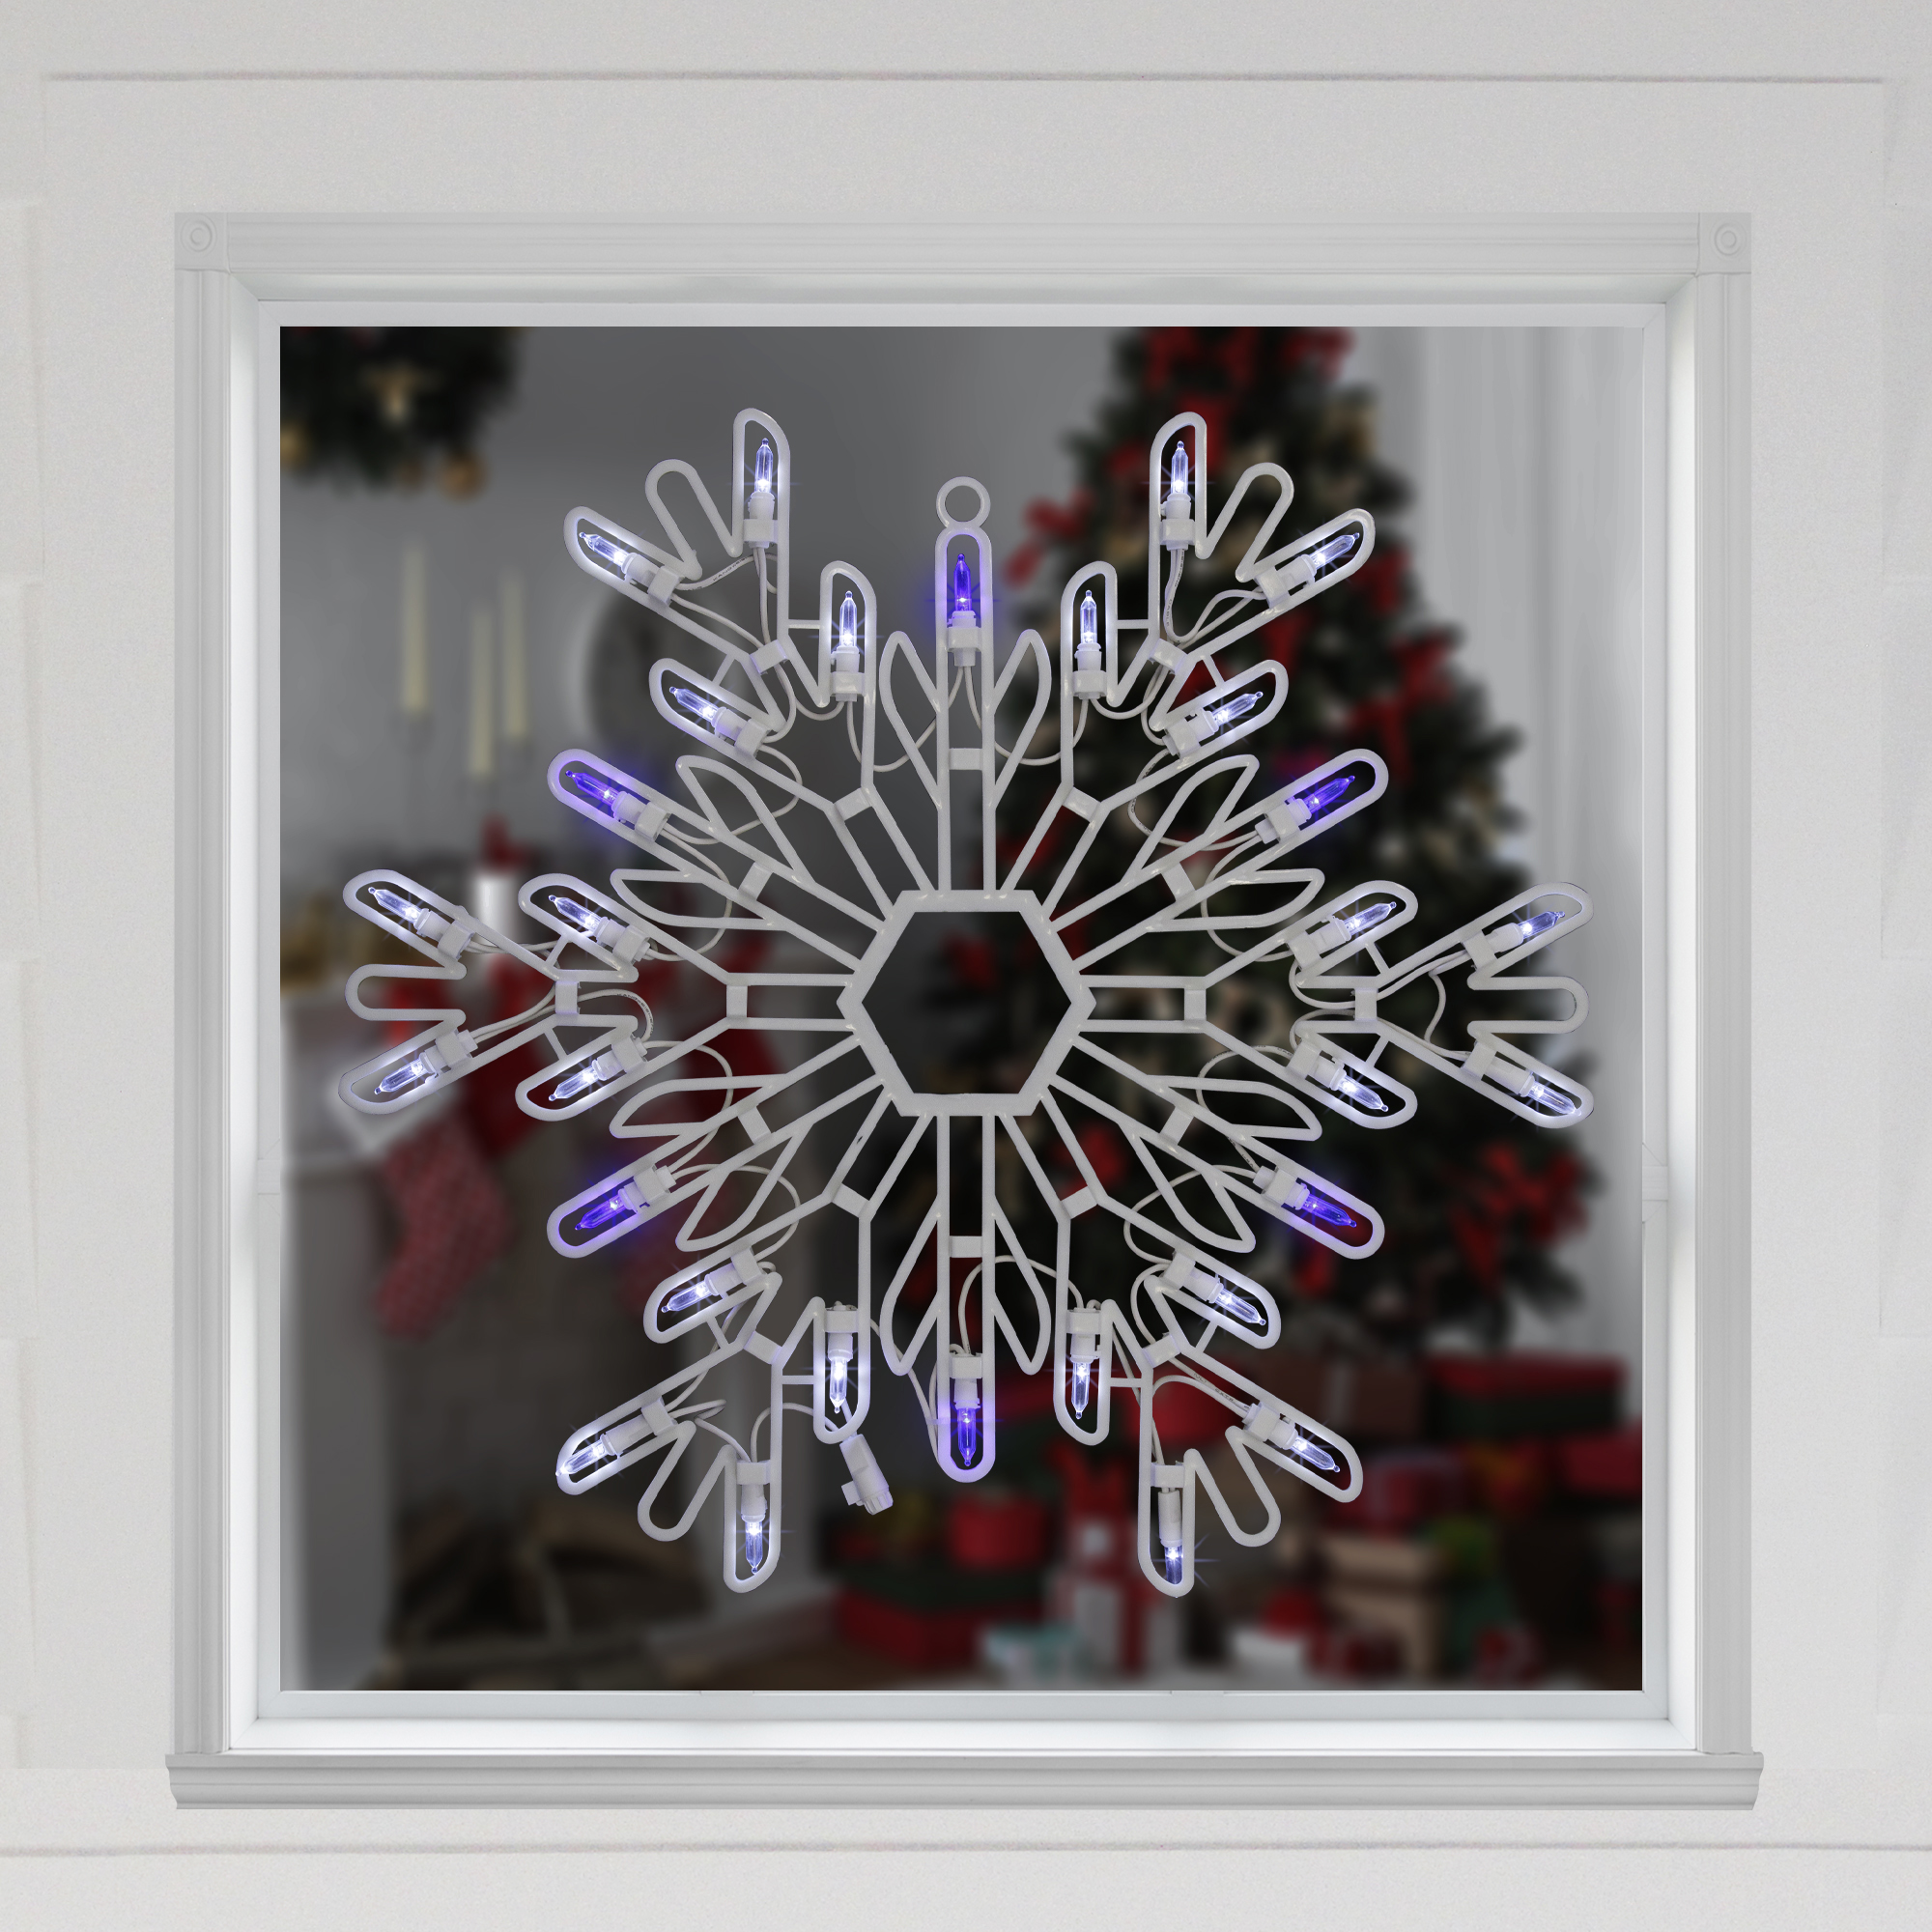 Northlight 15" LED Lighted Pure White and Blue Snowflake Christmas Window Silhouette Decor - image 2 of 6